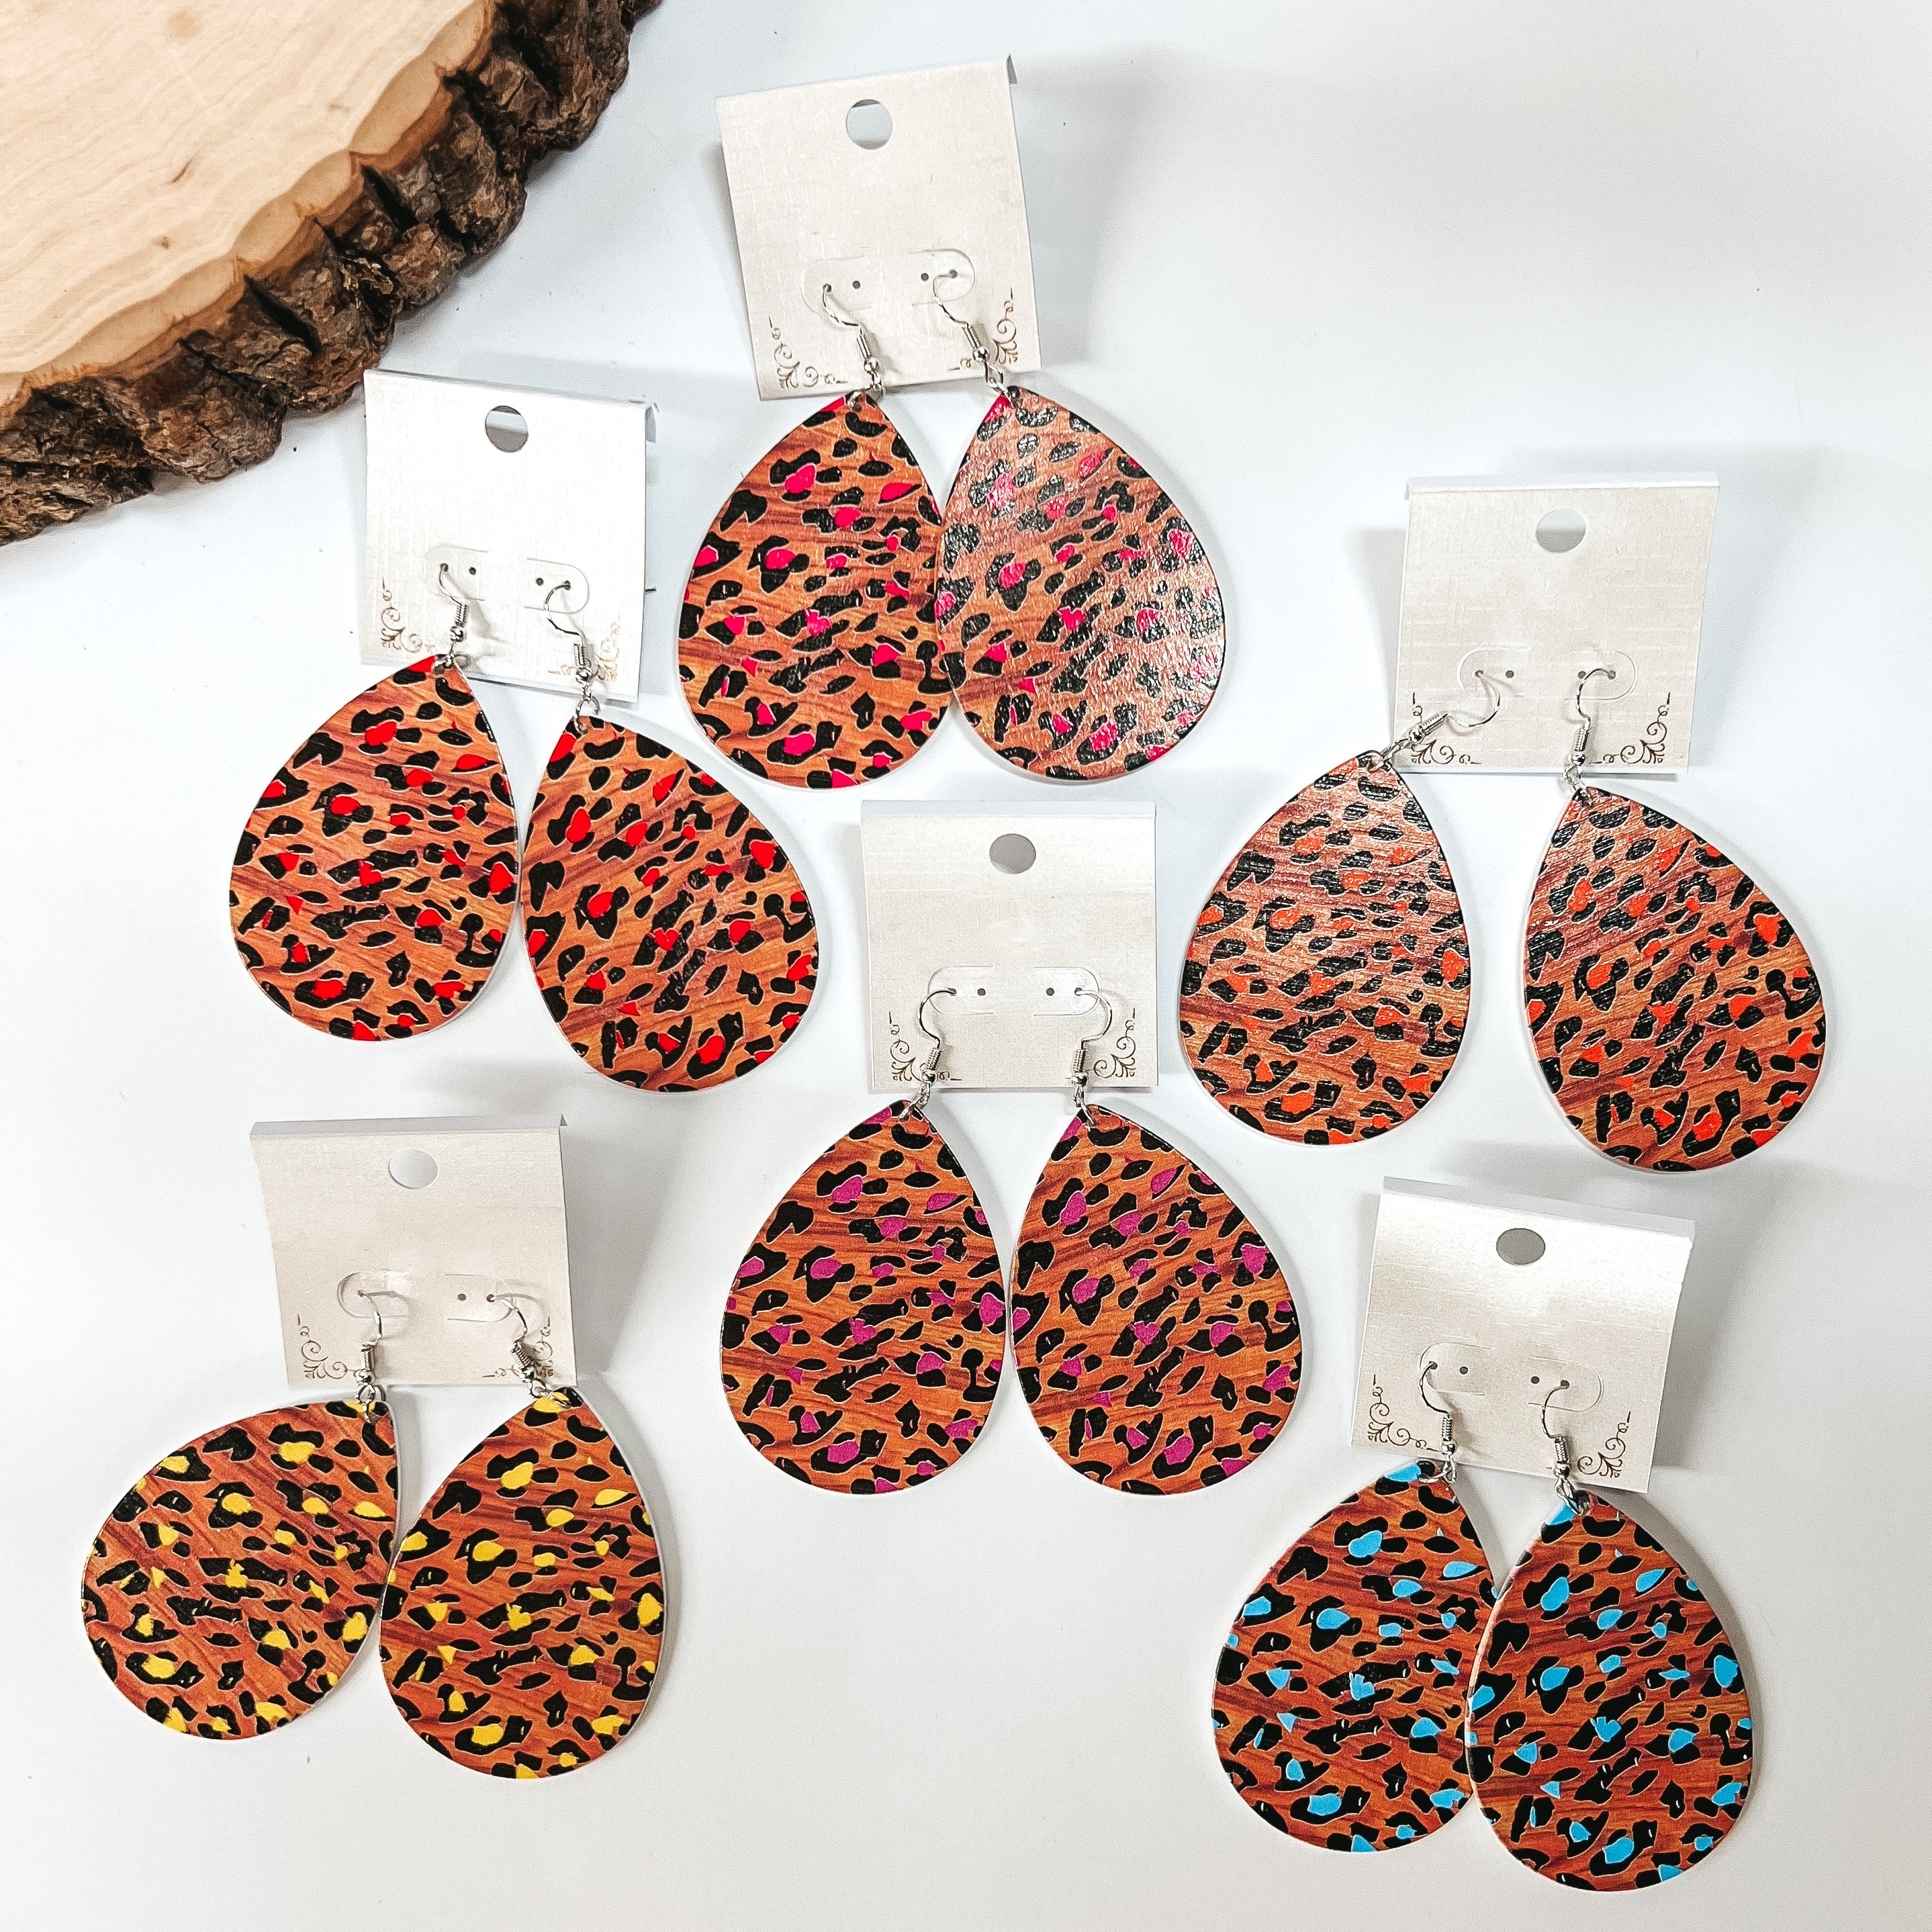 There are six pairs of wooden teardrop earrings in leopard print with different colors. Colors come in pink, purple, red, orange, yellow, and light blue. All earrings are placed in a white earrings holder. These earrings are taken on a white background with a slab of wood in the back as decor.